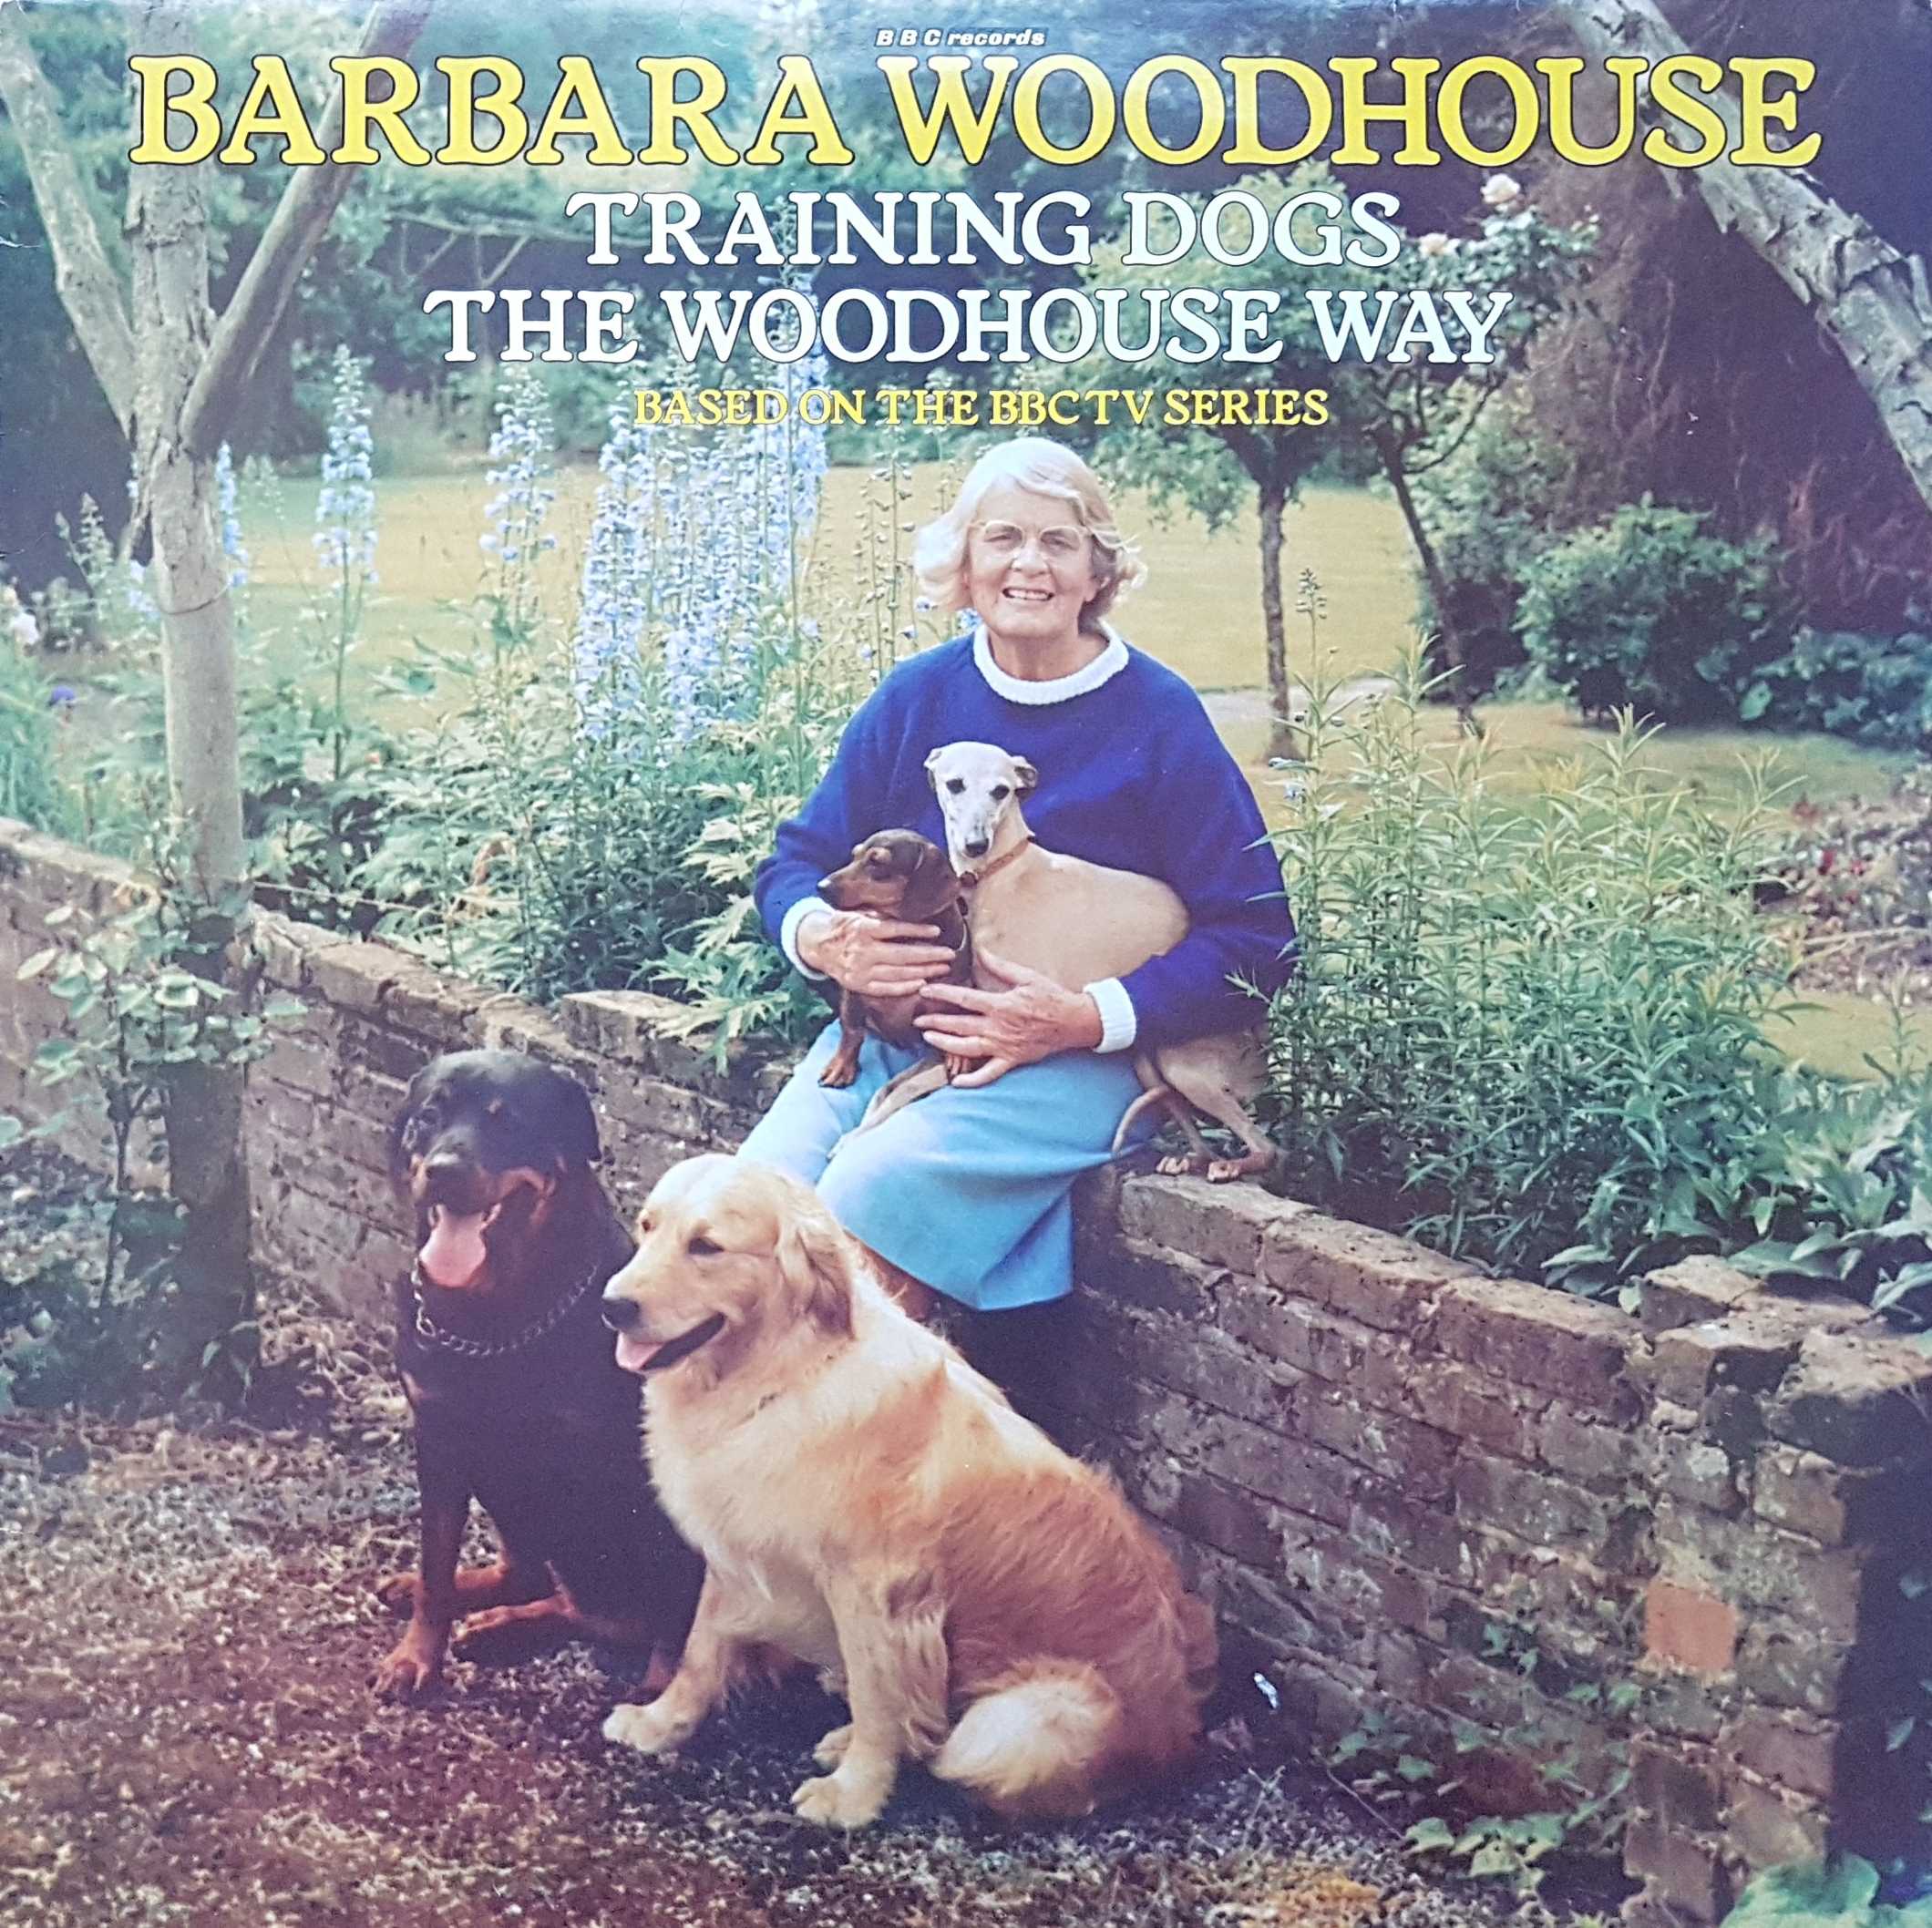 Picture of REC 455 Training dogs the Woodhouse way by artist Barbara Woodhouse from the BBC albums - Records and Tapes library